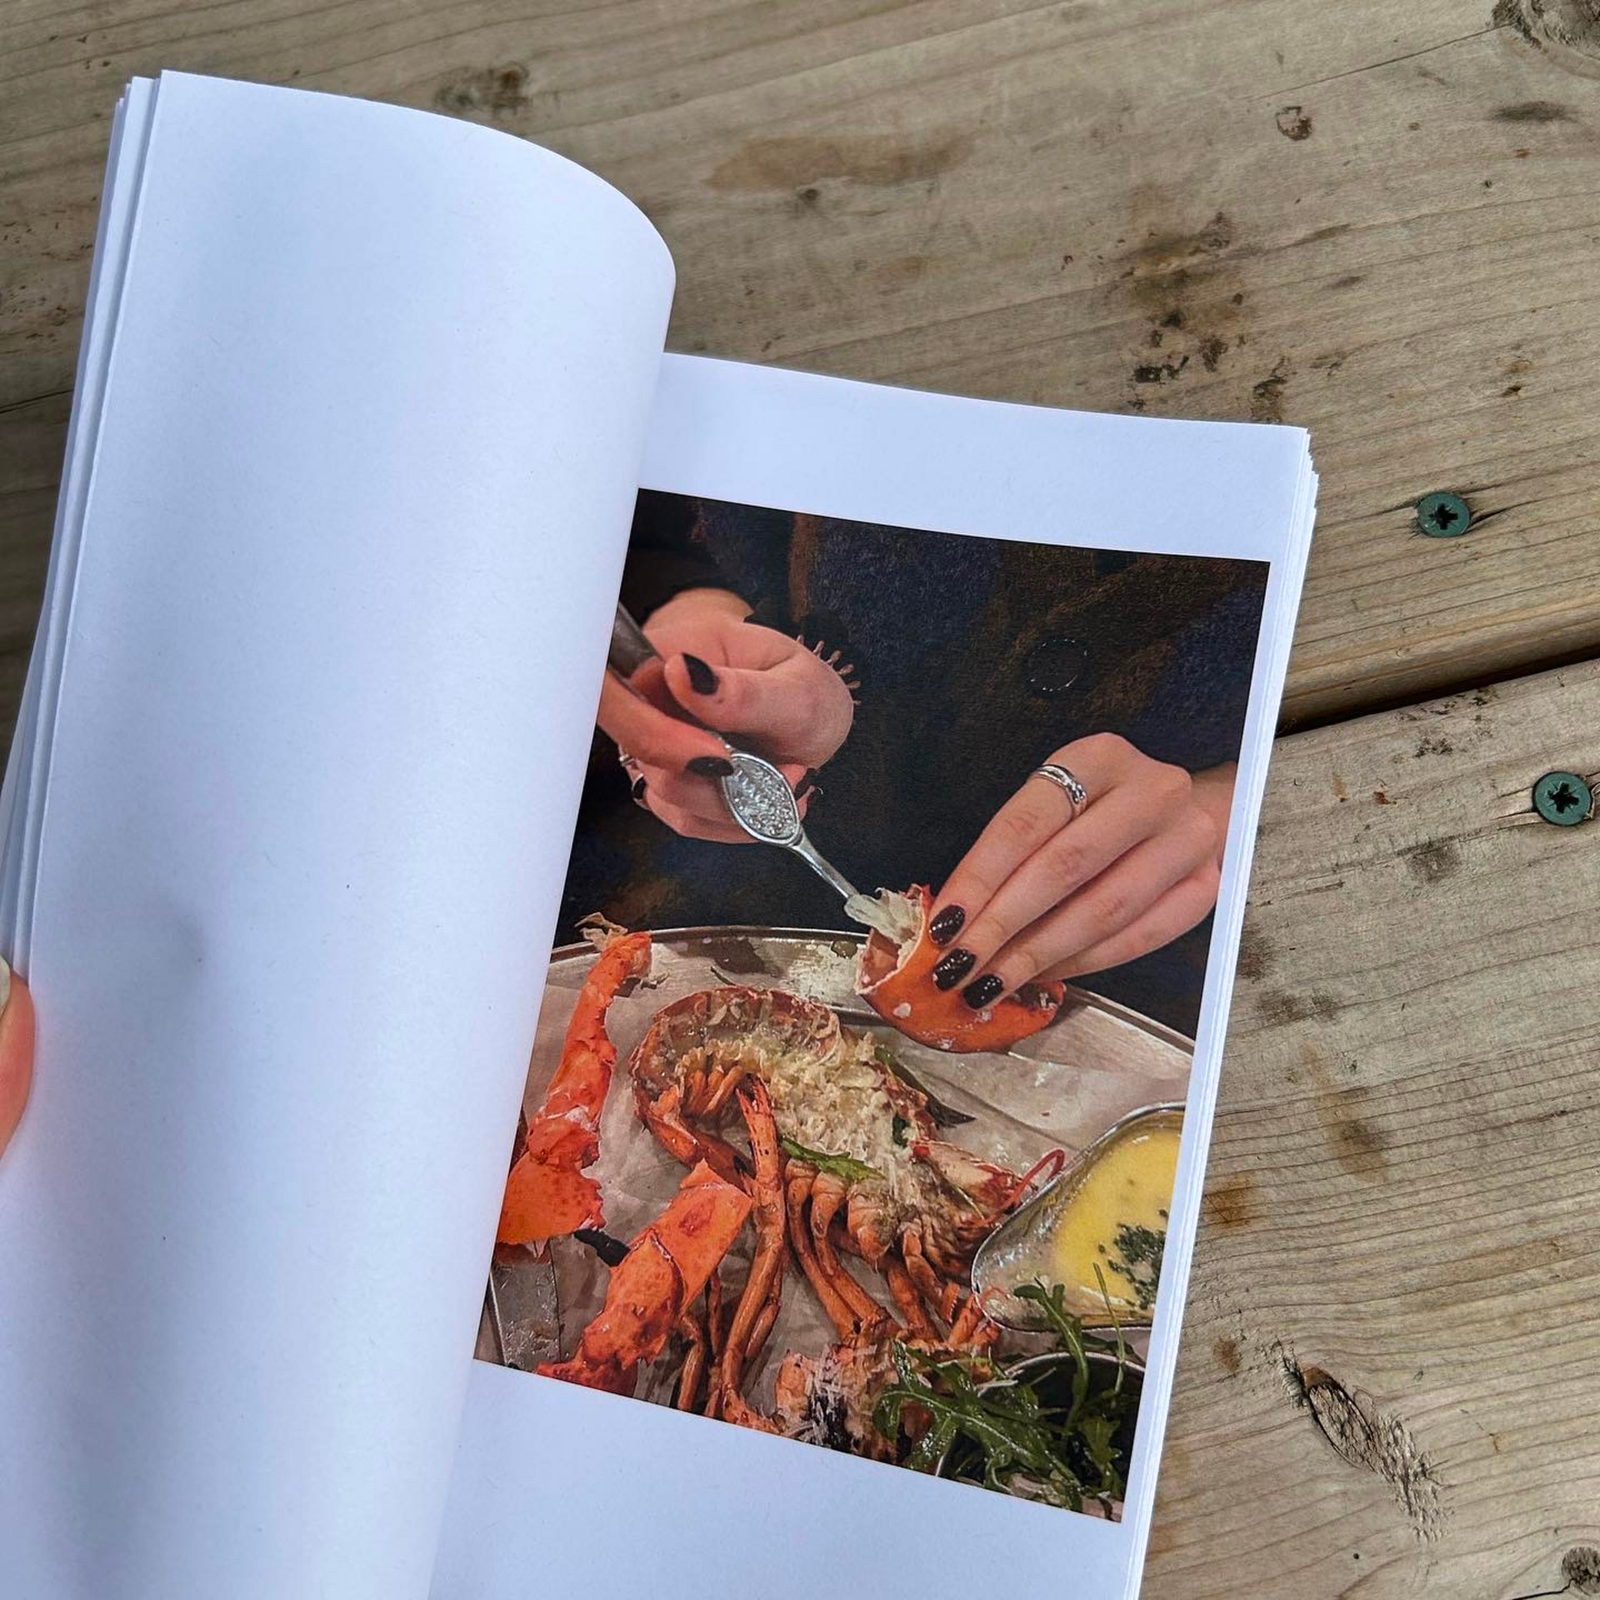 Image of open book showing a close up of hands pulling lobster meat from a claw. 